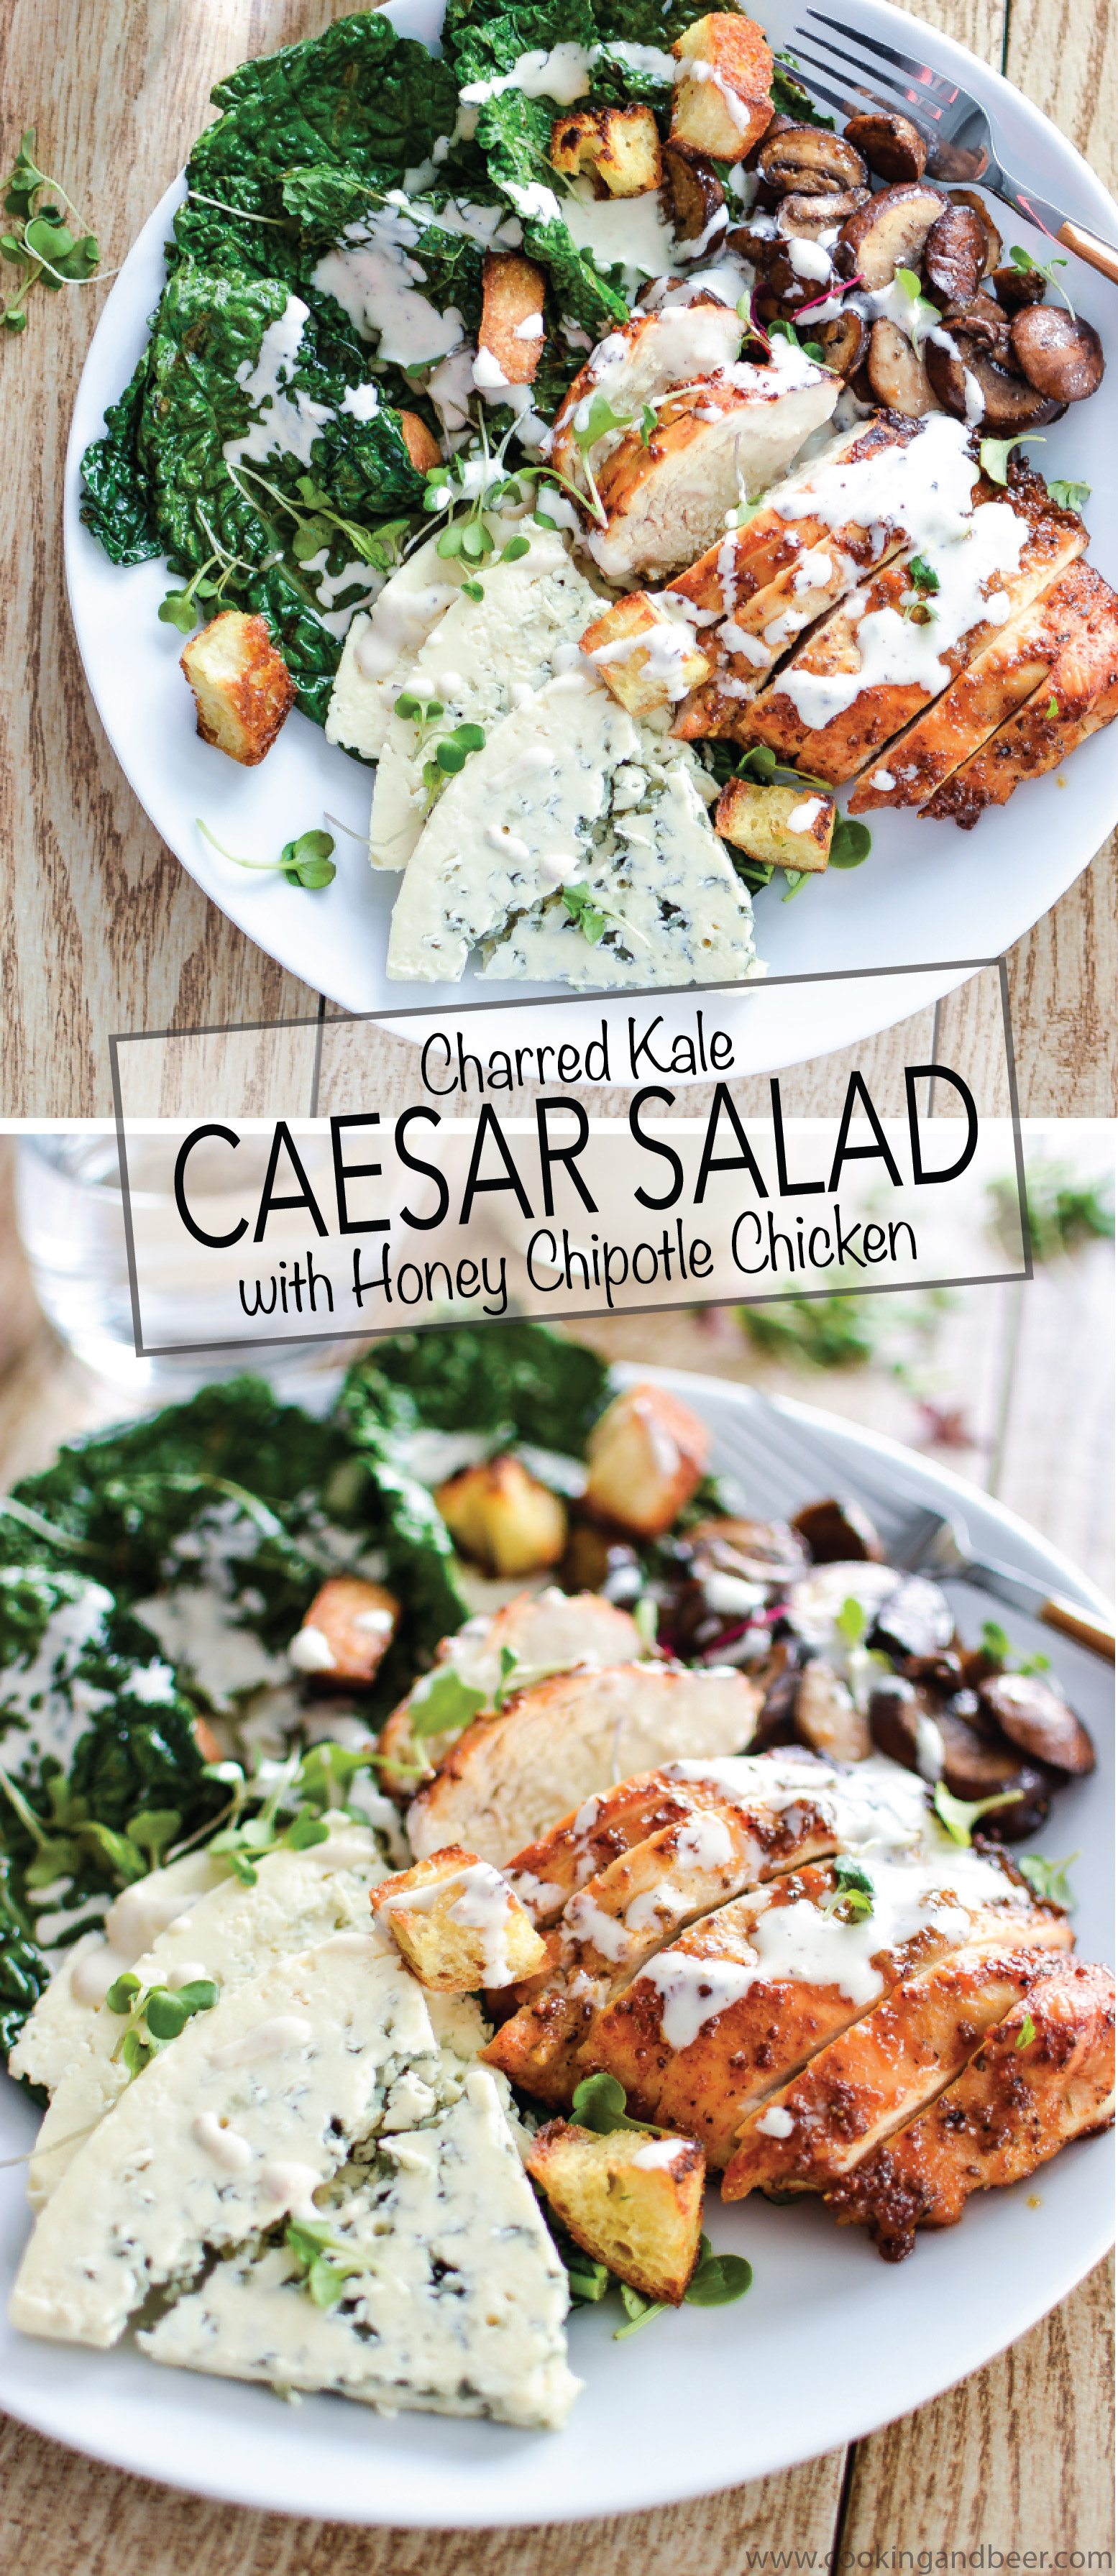 Charred Kale Caesar Salad with Honey Chipotle Chicken is a fun twist on a traditional caesar salad, using kale instead of romaine! | www.cookingandbeer.com